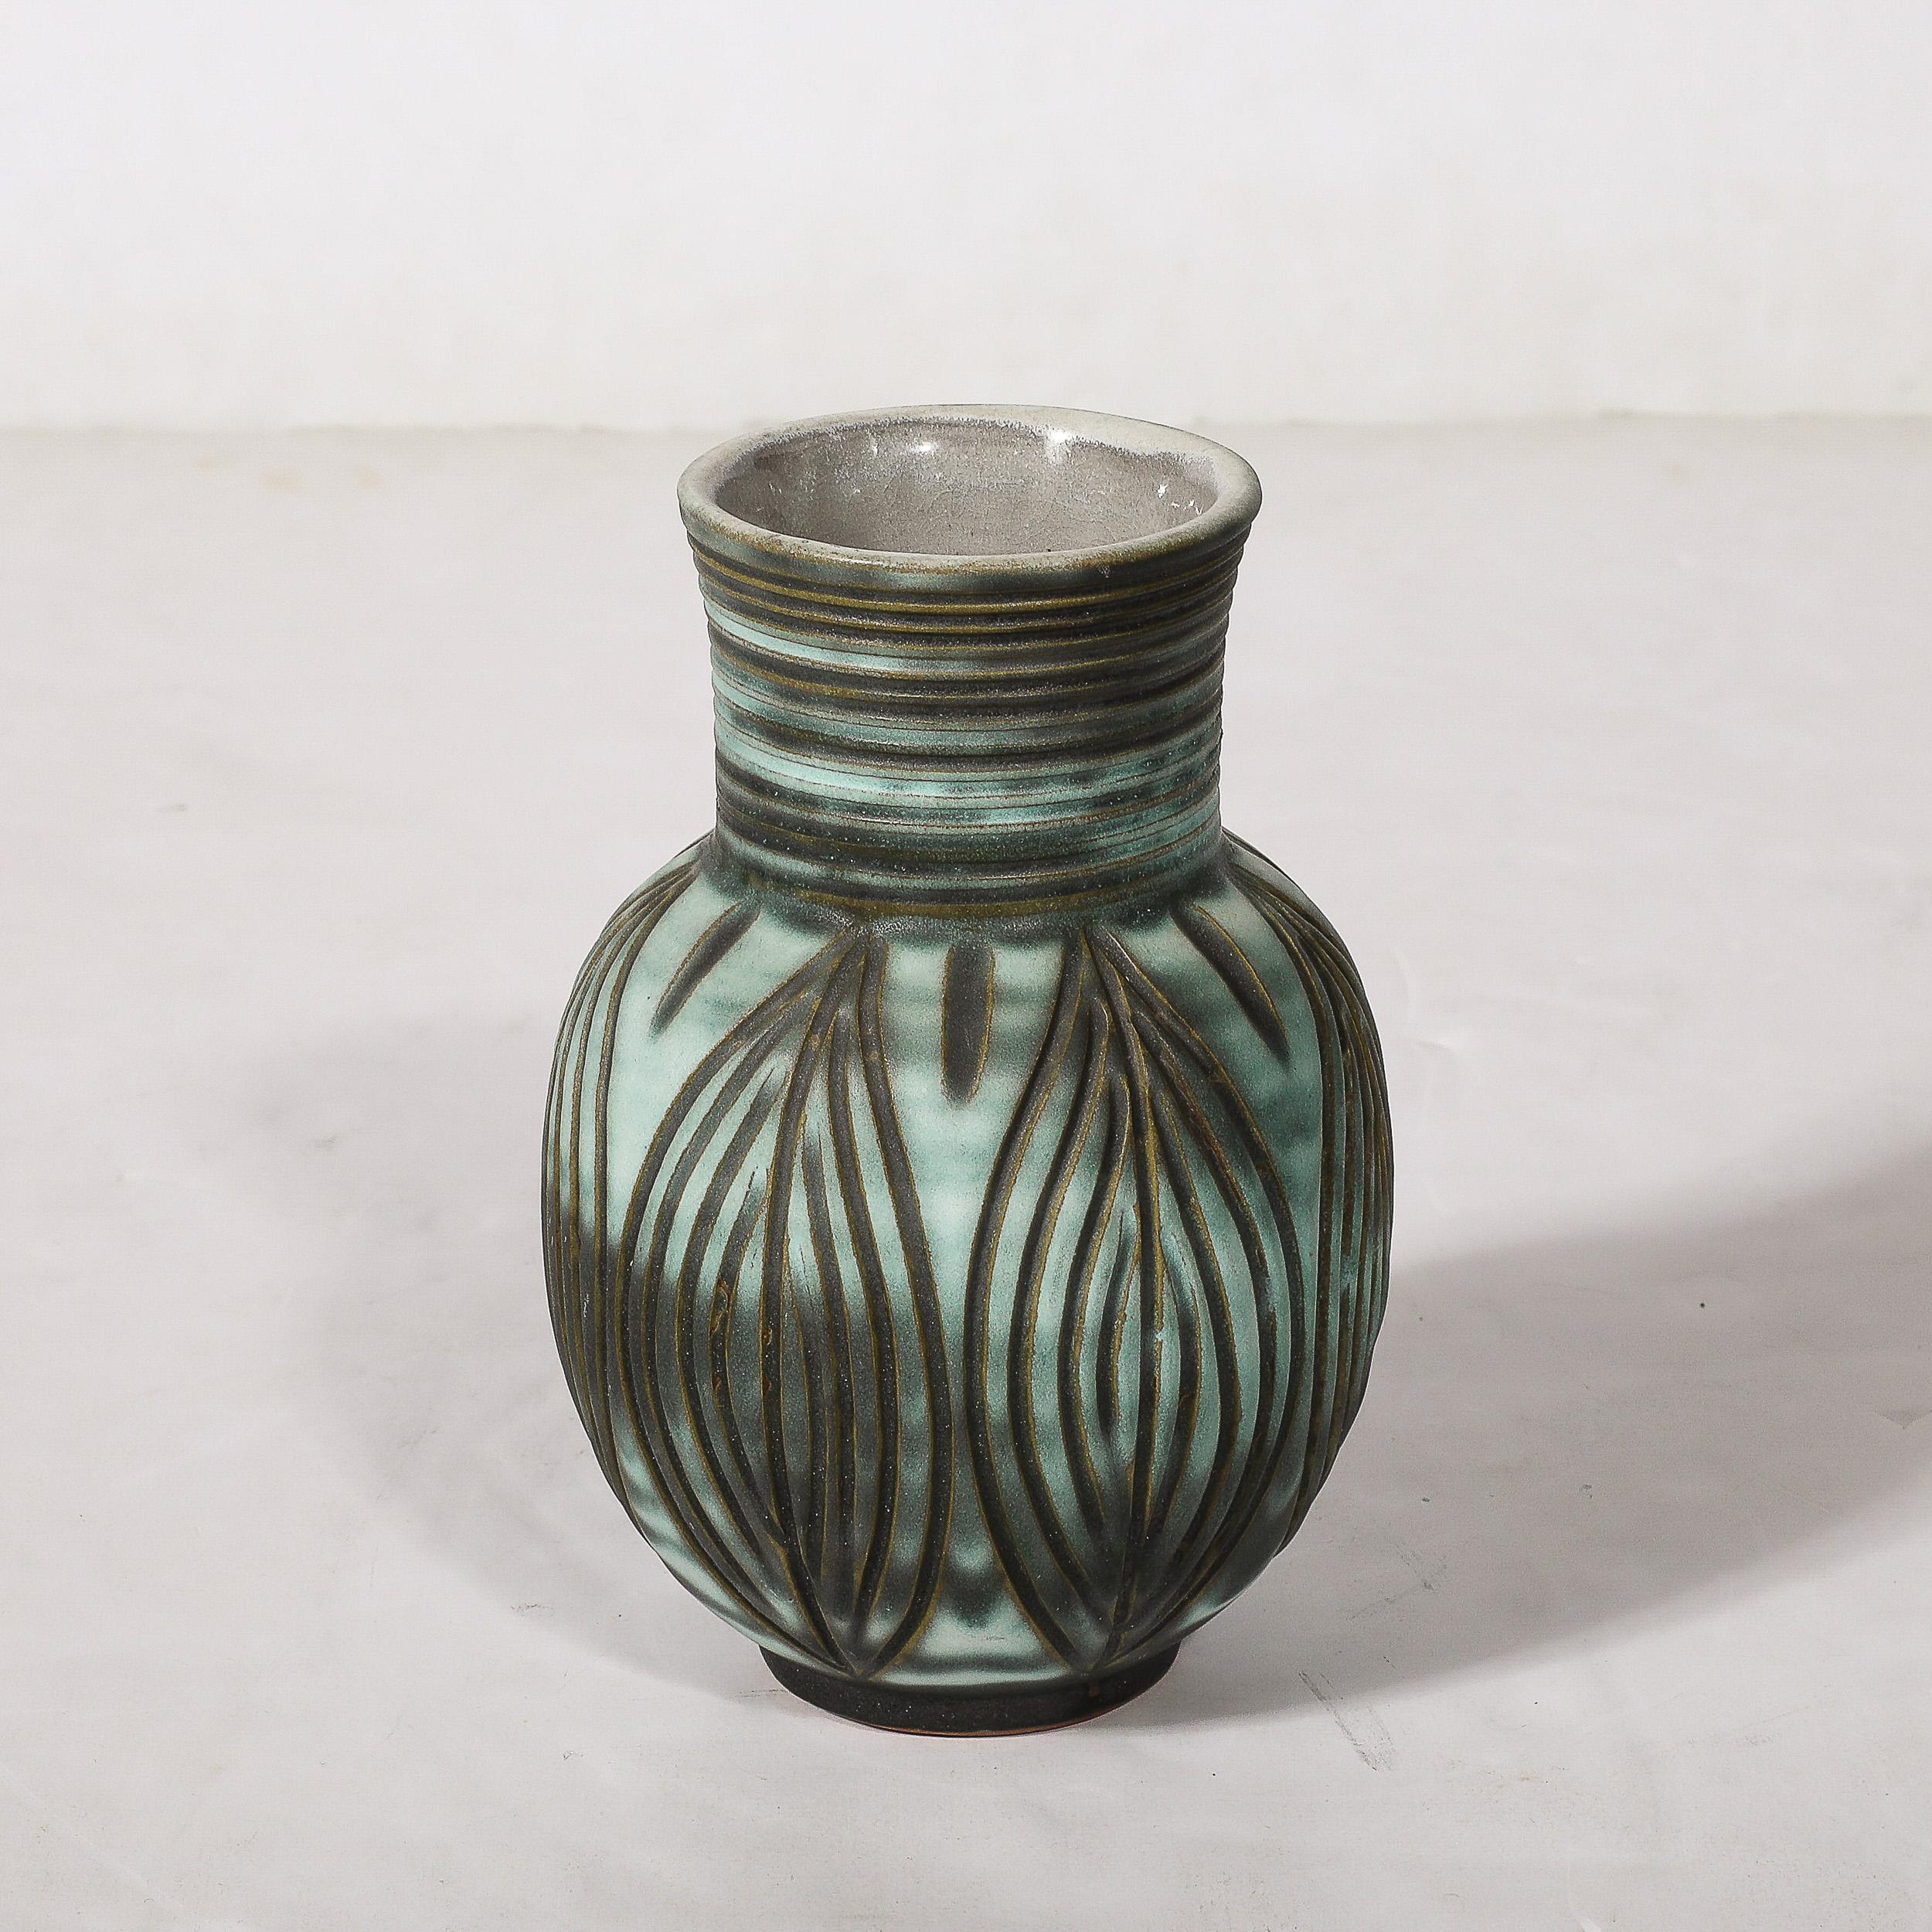 Late 20th Century Mid-Century Modernist Linear Grooved Teal/Smoked Umber Vase by Design Techniques For Sale